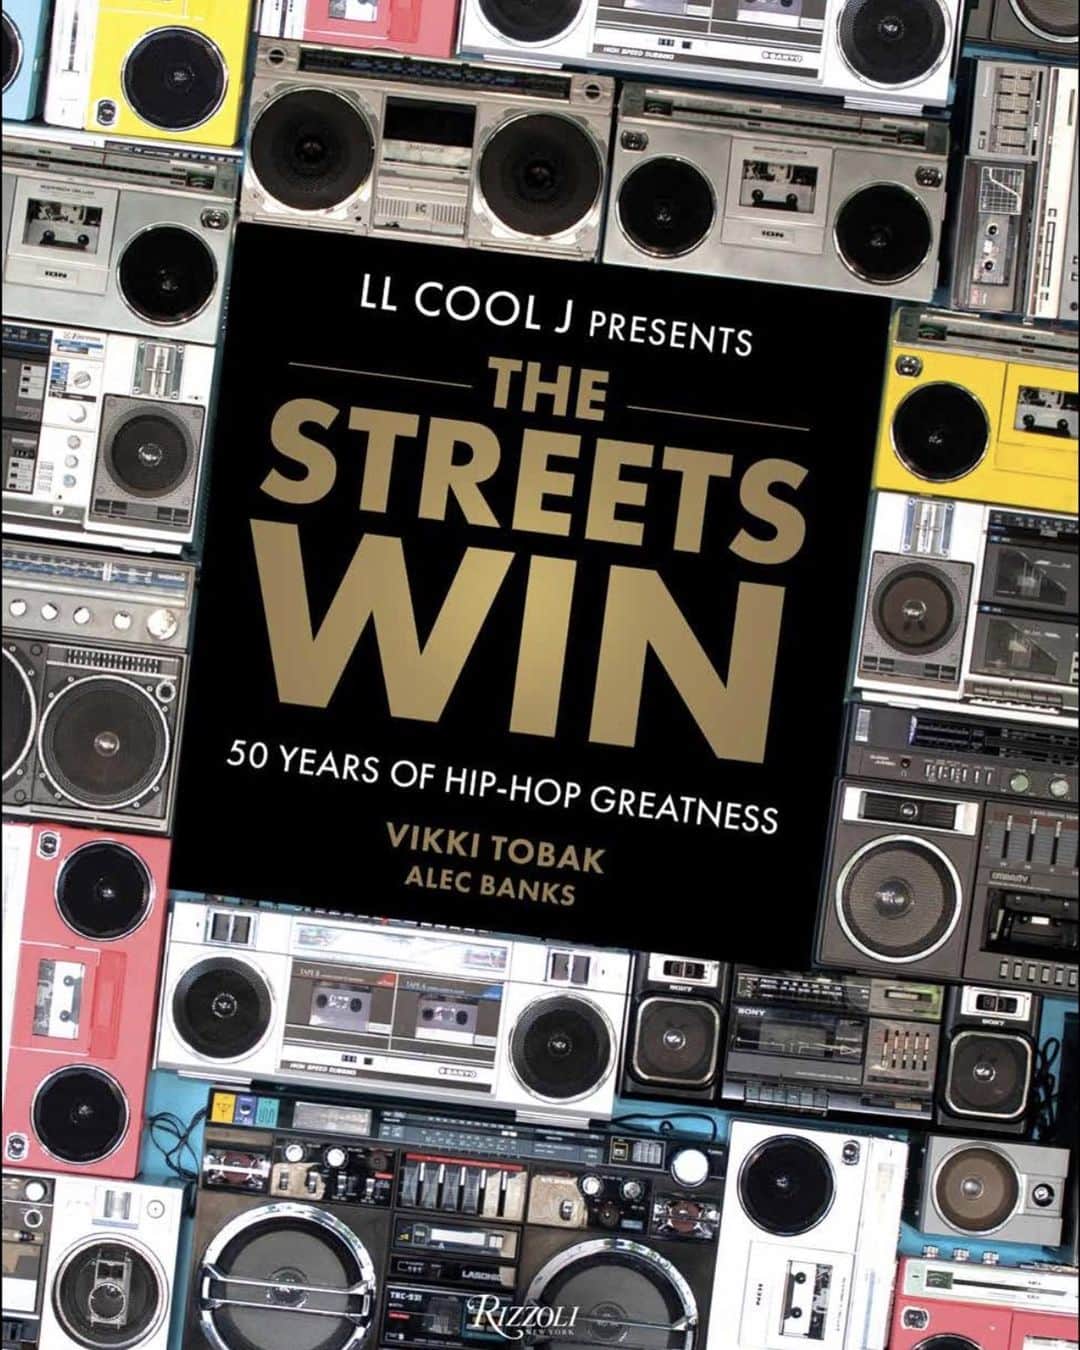 LL・クール・Jのインスタグラム：「“I’m honored to present to you all another creative milestone for Hip-Hop culture! Our new book The Streets Win!   This is a book filled with Hip-Hop greats telling the story of Hip-Hop in their own words. These are the real and true origin stories that will be remembered and retold a thousand years from now! Straight from the horses mouth!   The Streets Win drops October 2023. Available for pre-order at the link in bio 💪🏾” - @llcoolj   @kooldjherc @saltnpepaofficial @mclyte @teacha_krsone @eminem @therealmaryjblige @djflash4eva @rundmc @beastieboys @wearedelasoul @therulernyc @publicenemy @snoopdogg @drdre @nas @atcq @officialbigdaddykane @fatjoe @djkhaled」